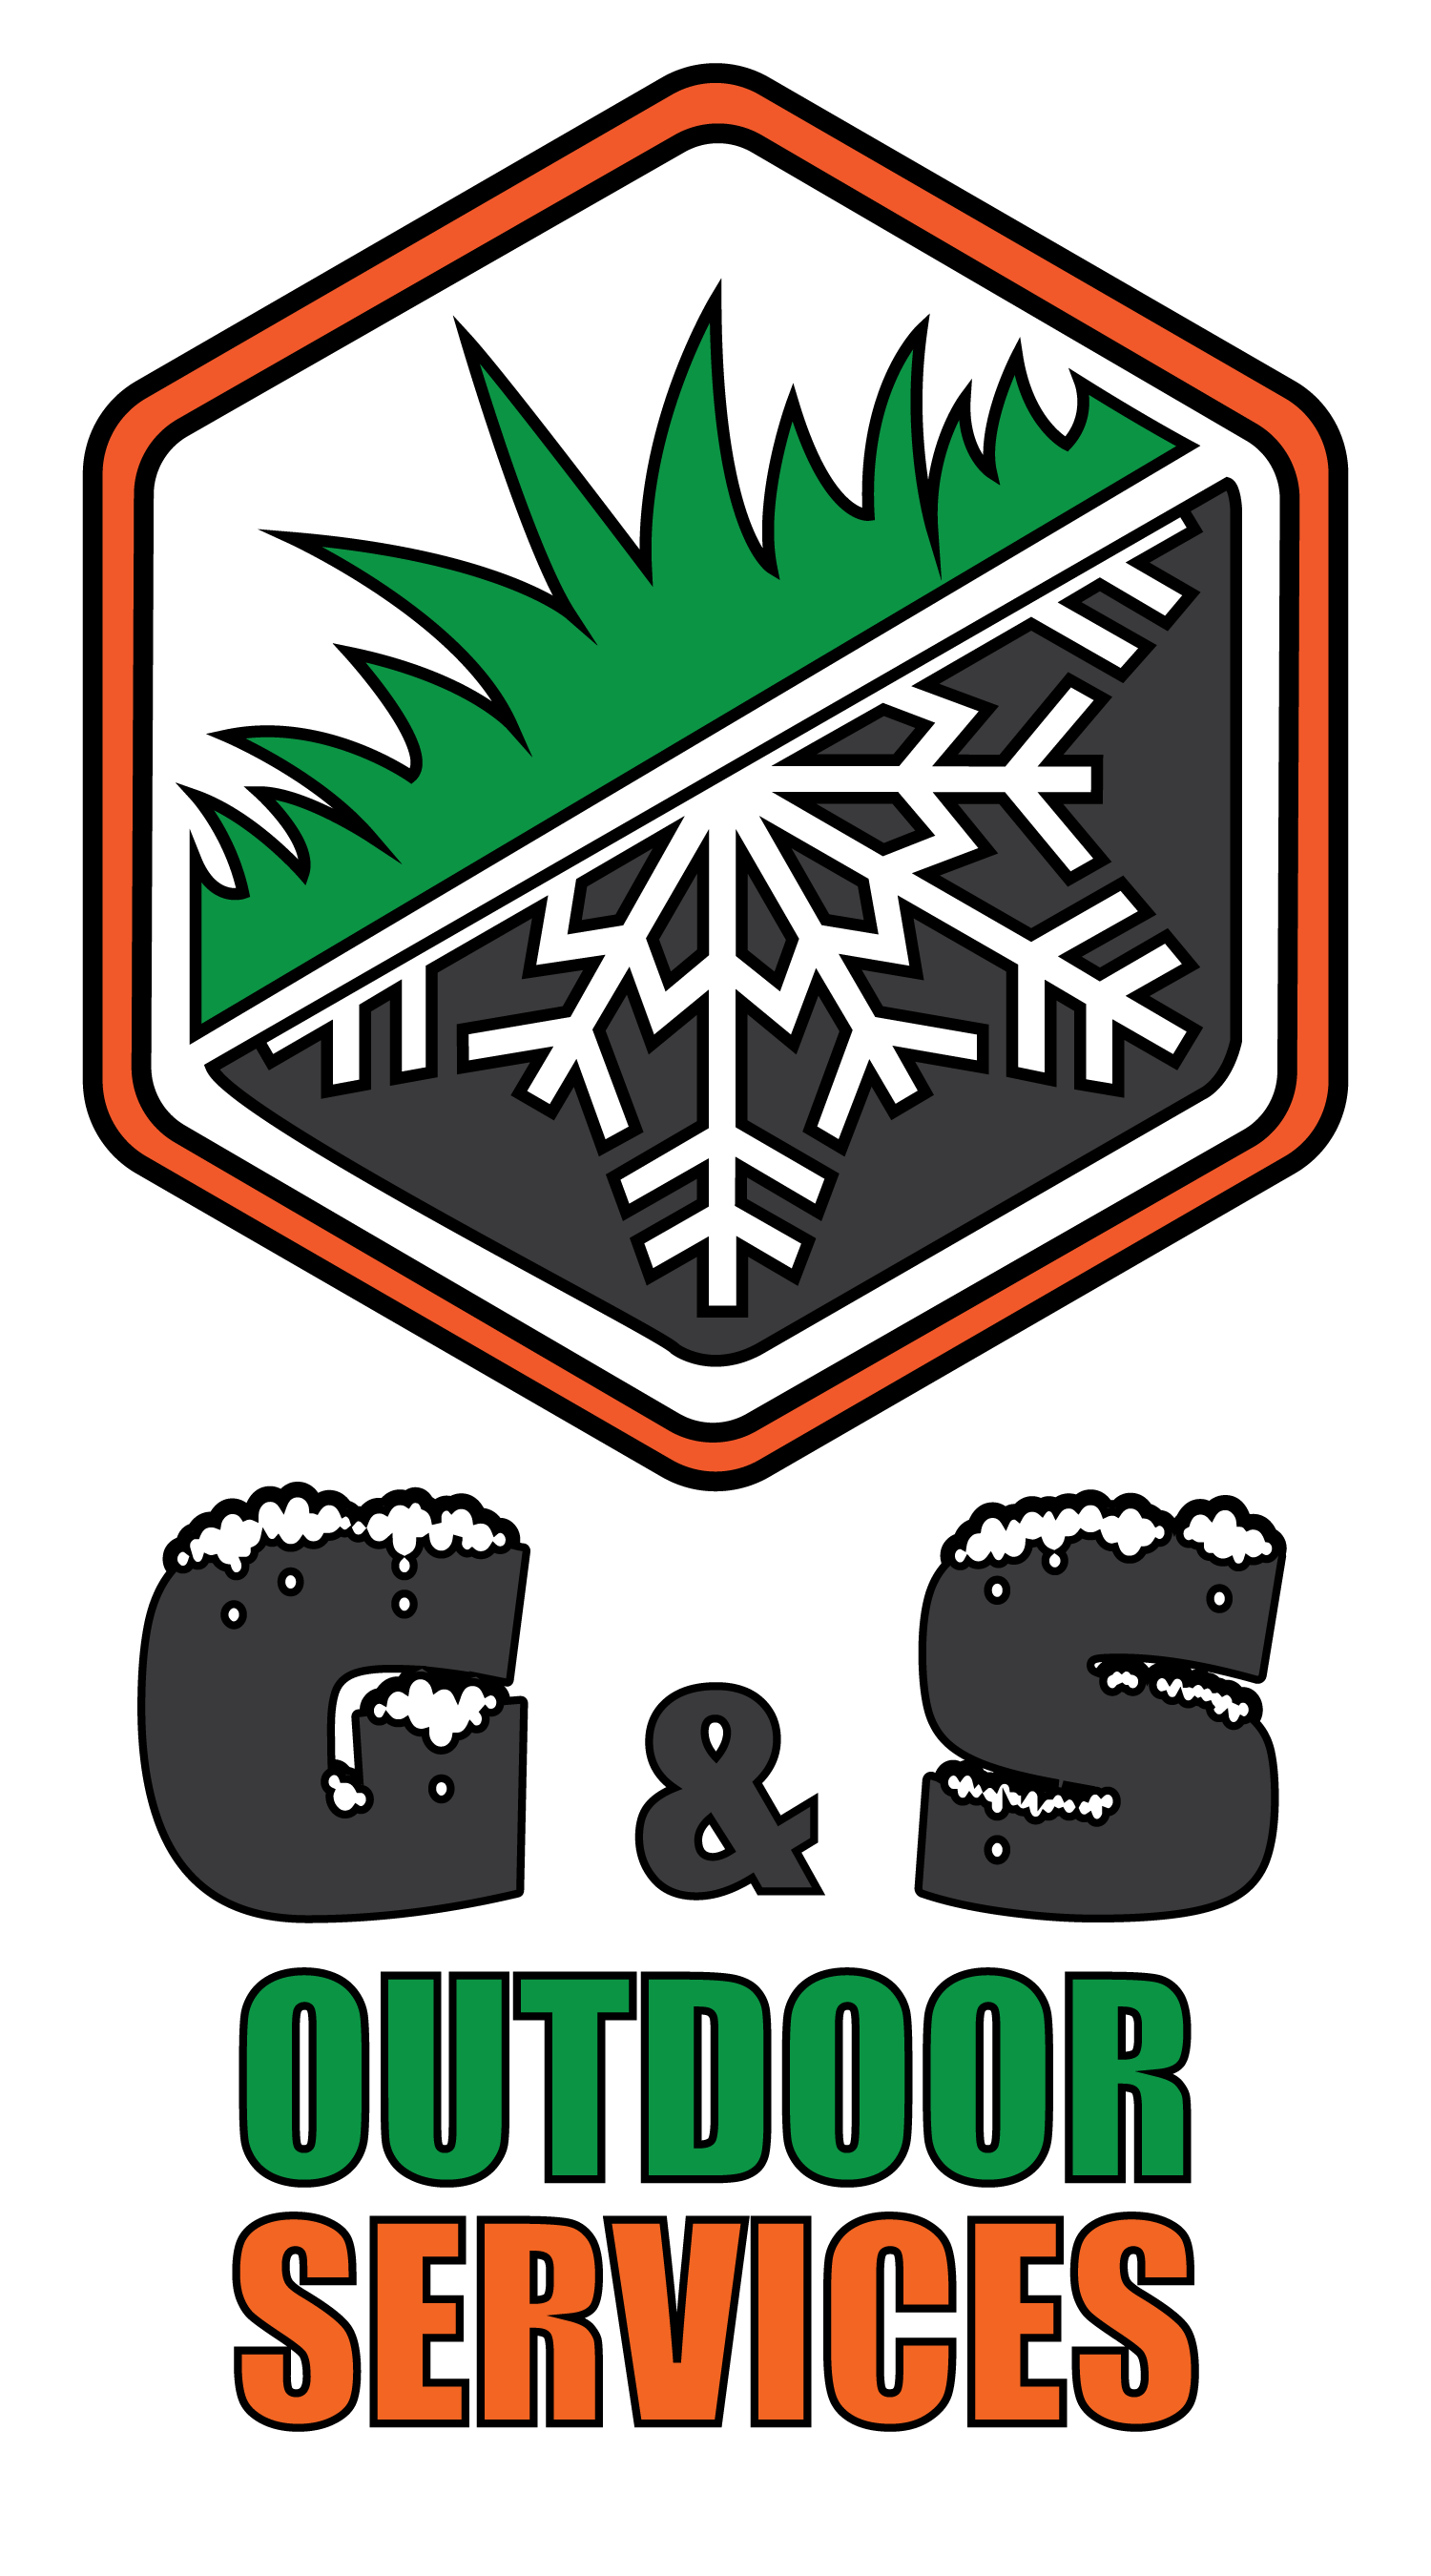 G 'N' S Outdoor Services Logo